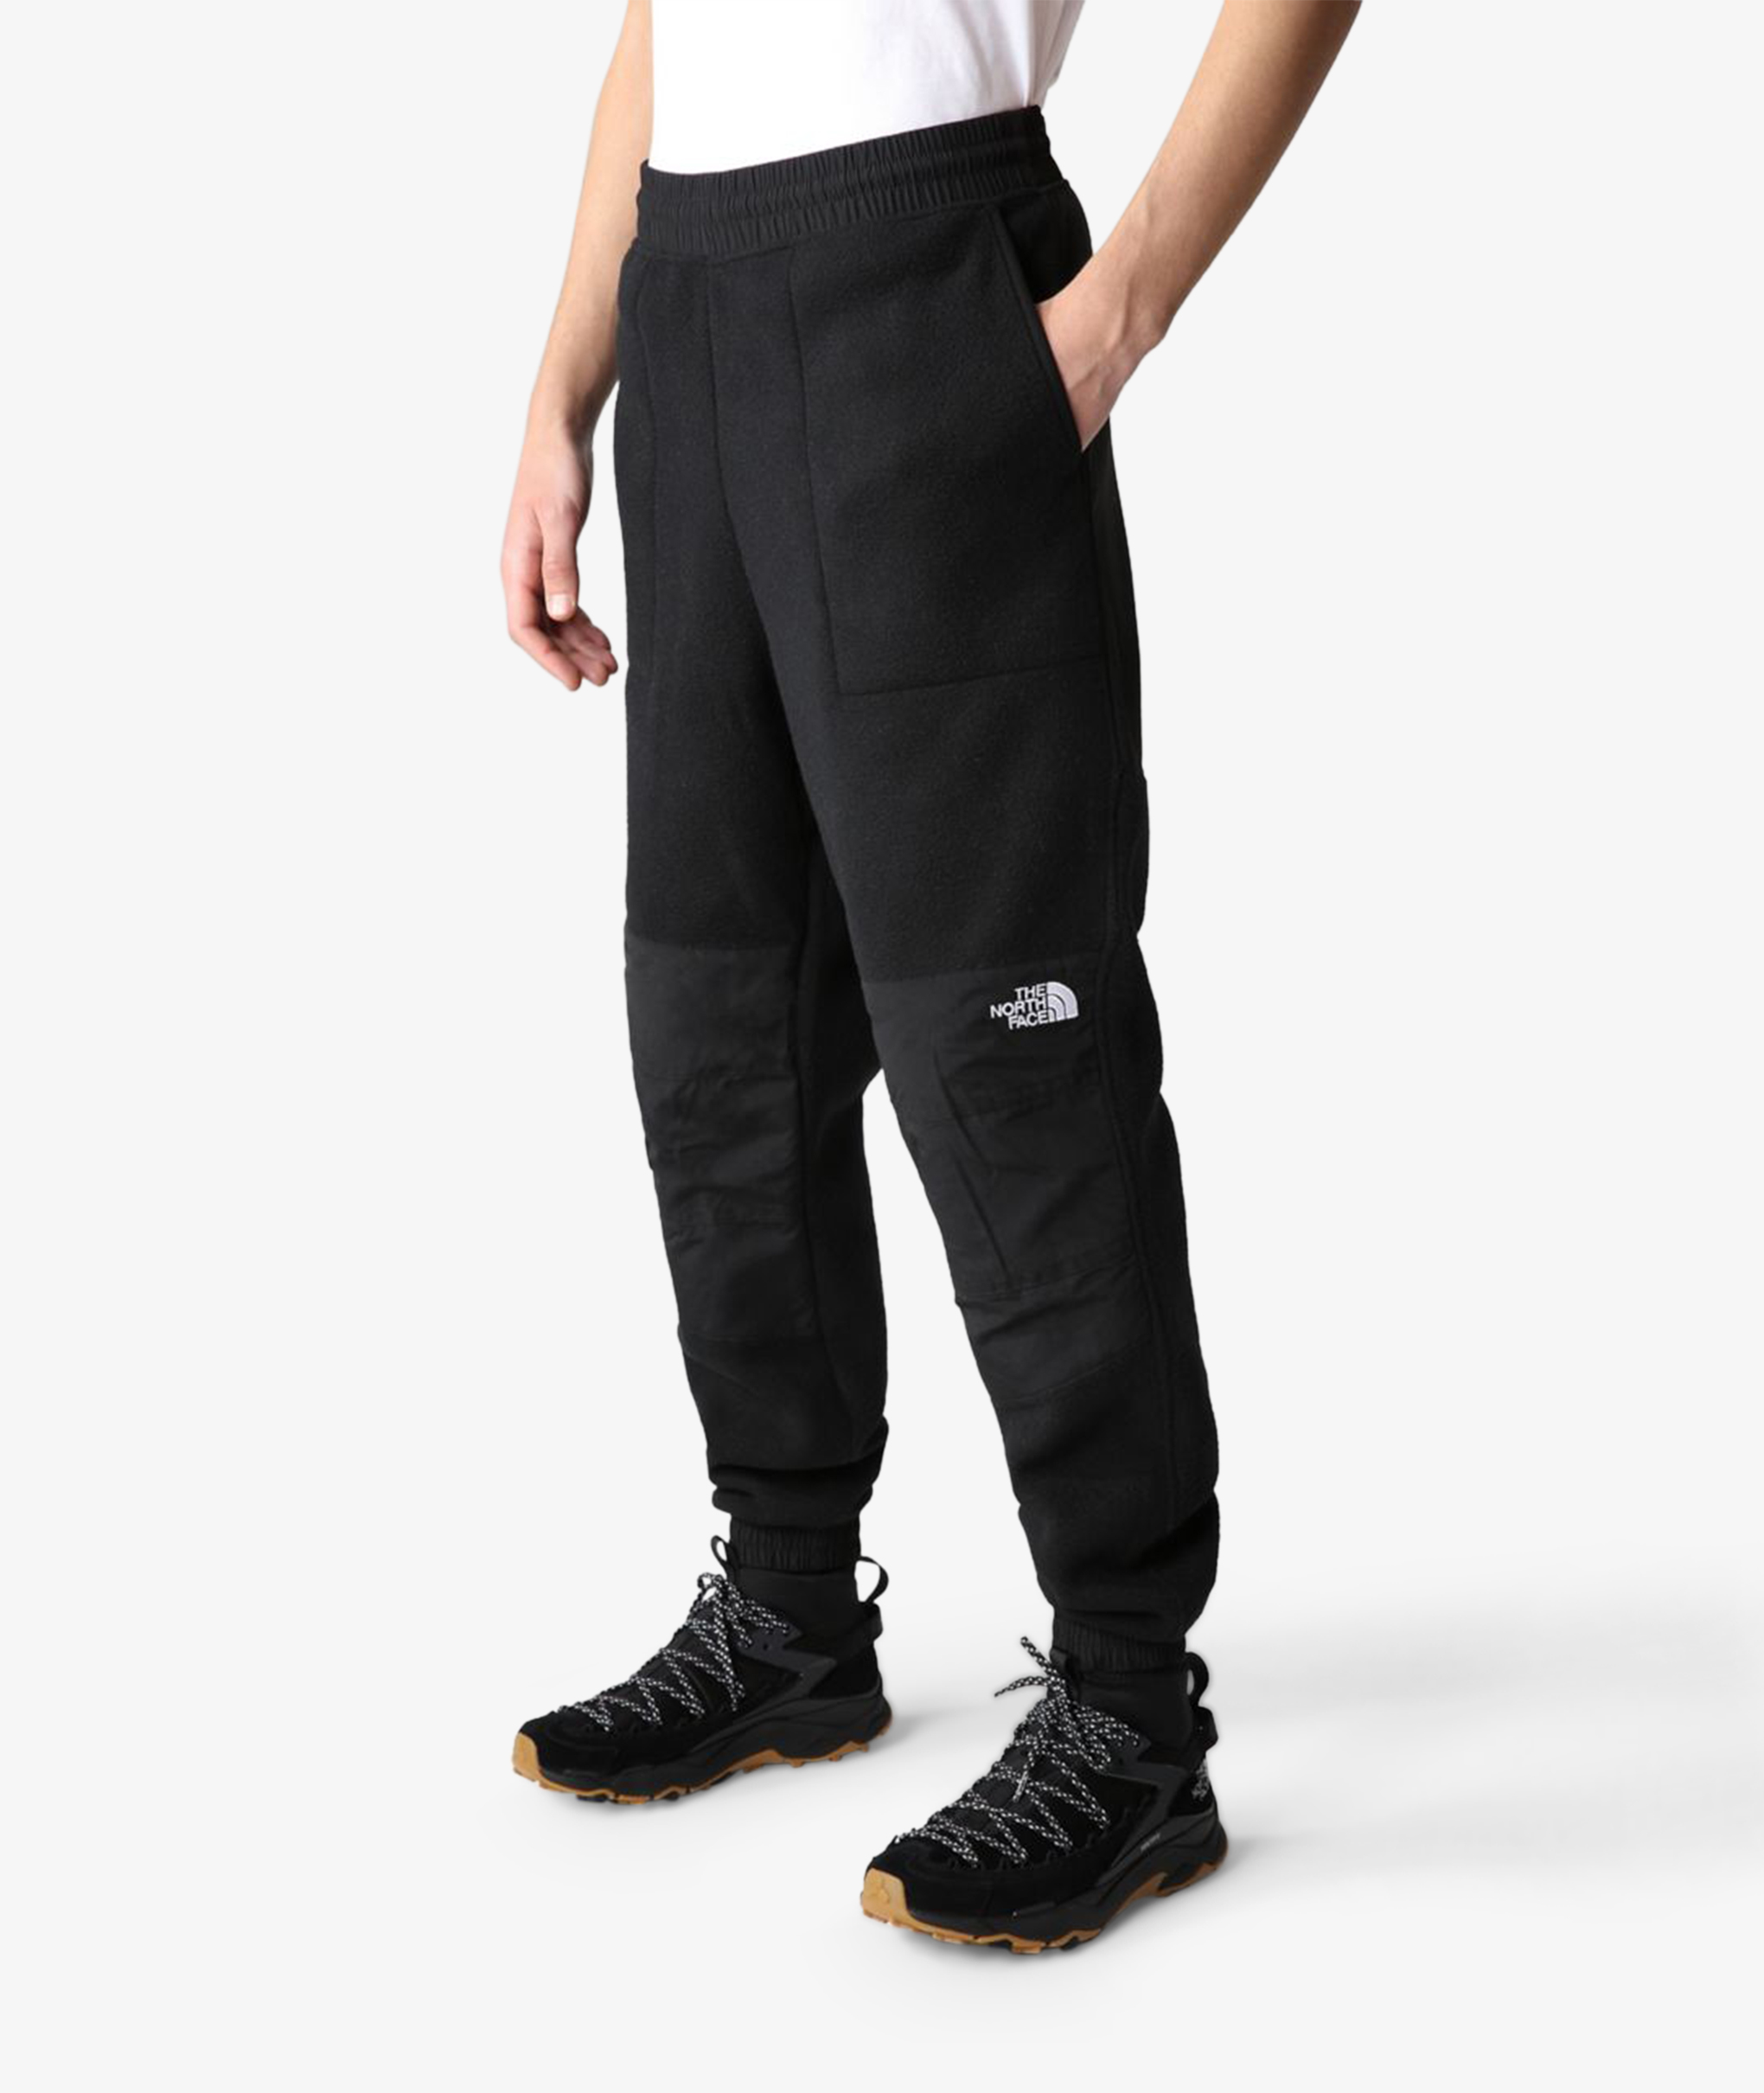 Norse Store | Shipping Worldwide - The North Face Denali Pant - Black